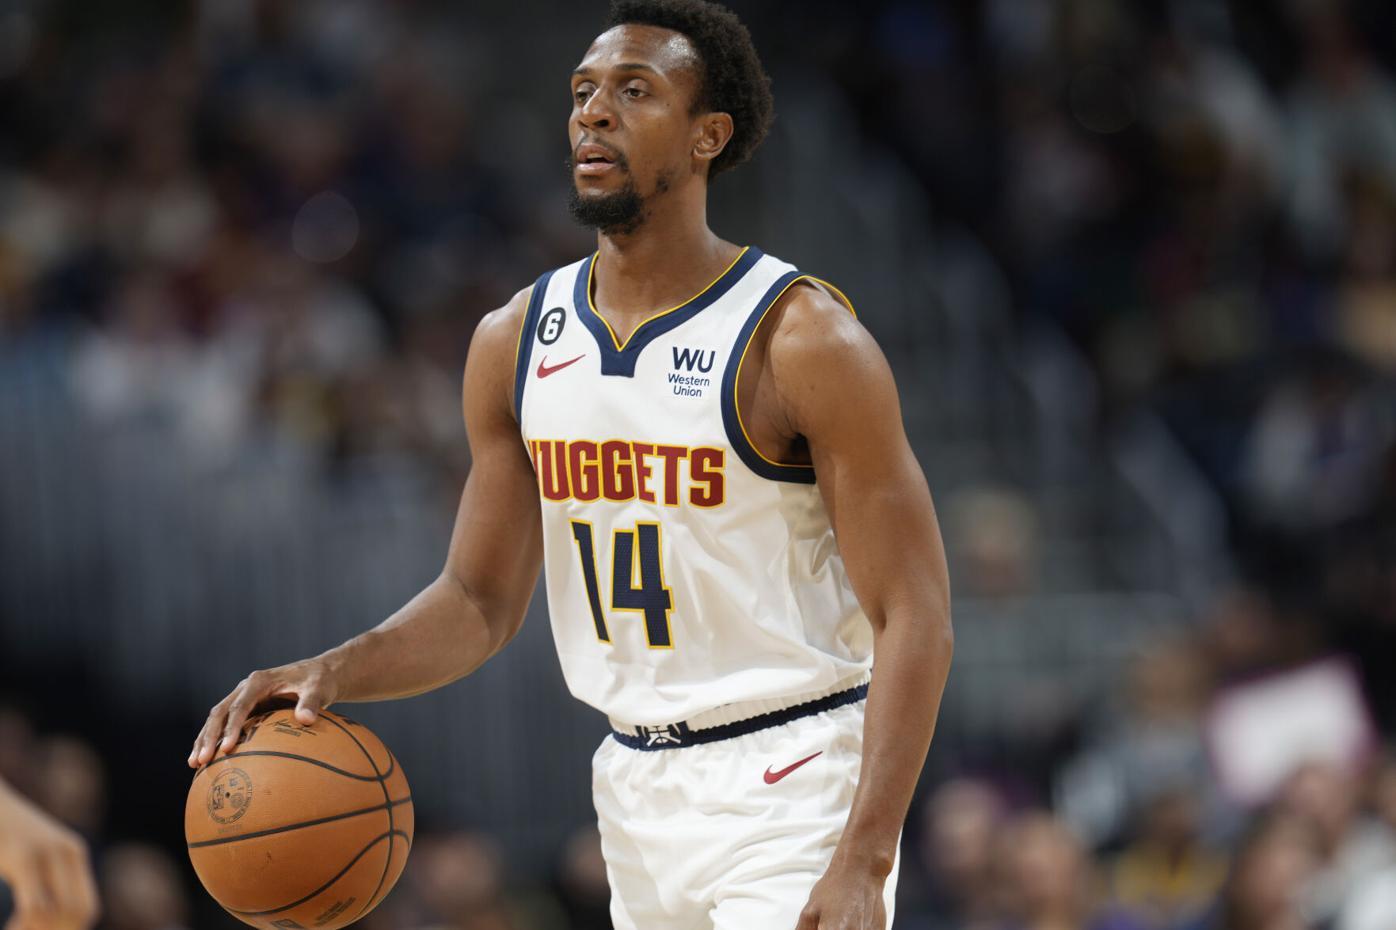 Ish Smith plays for the Nuggets in NBA Finals, his 13th team in 13